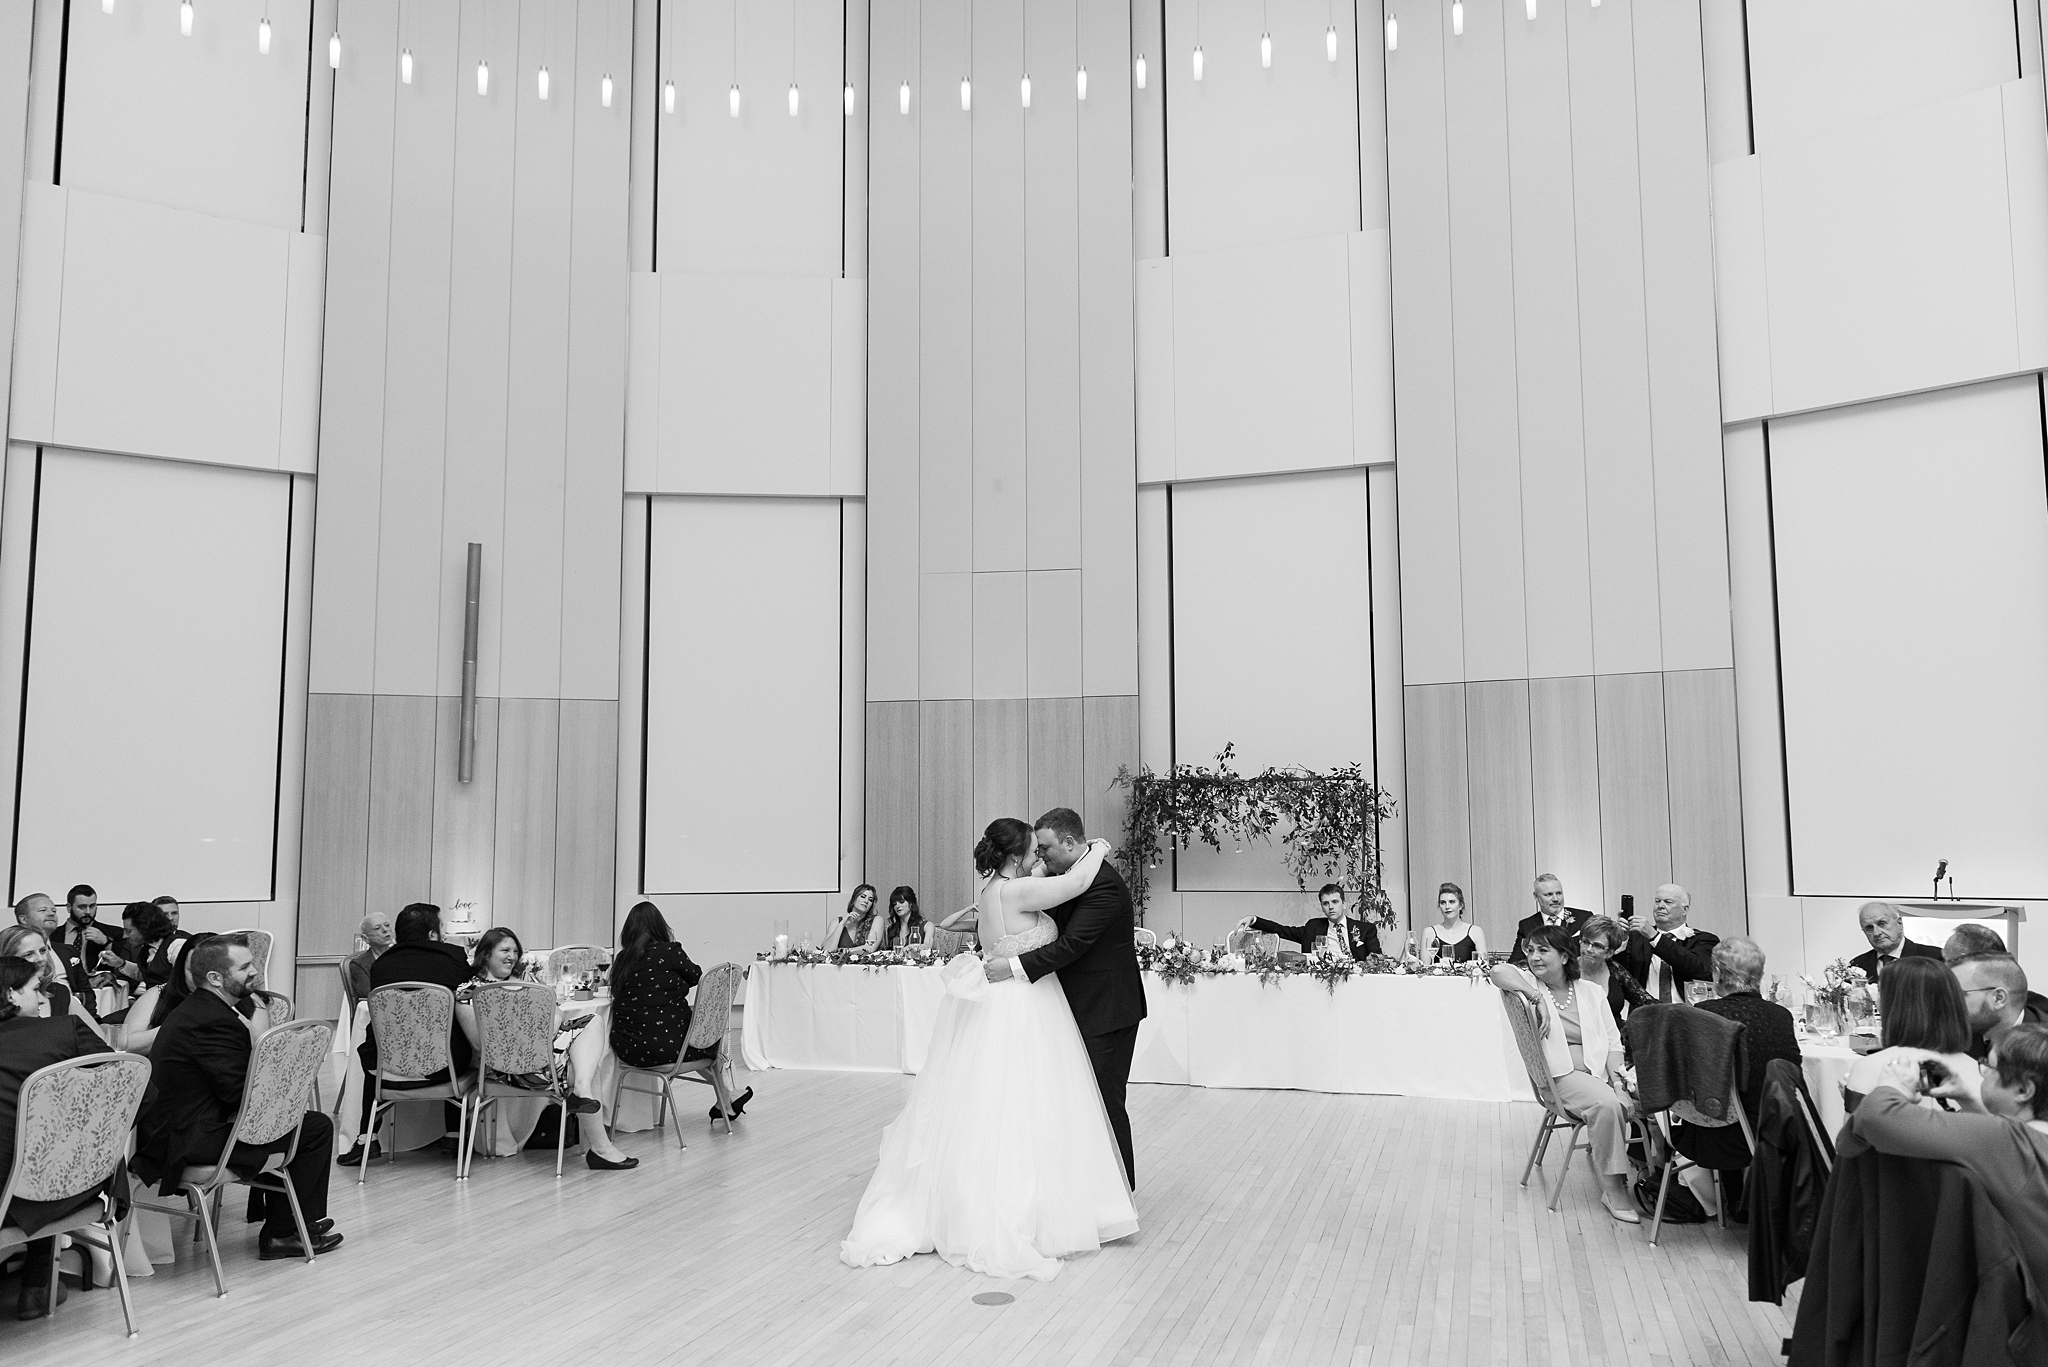 Autumn Wedding at the Canadian Museum of Nature | Ottawa Wedding | Wedding photos at the Canadian Museum of Nature Get more inspiration from this lovely autumn wedding. #ottawawedding #weddingphotography #ottawaweddings